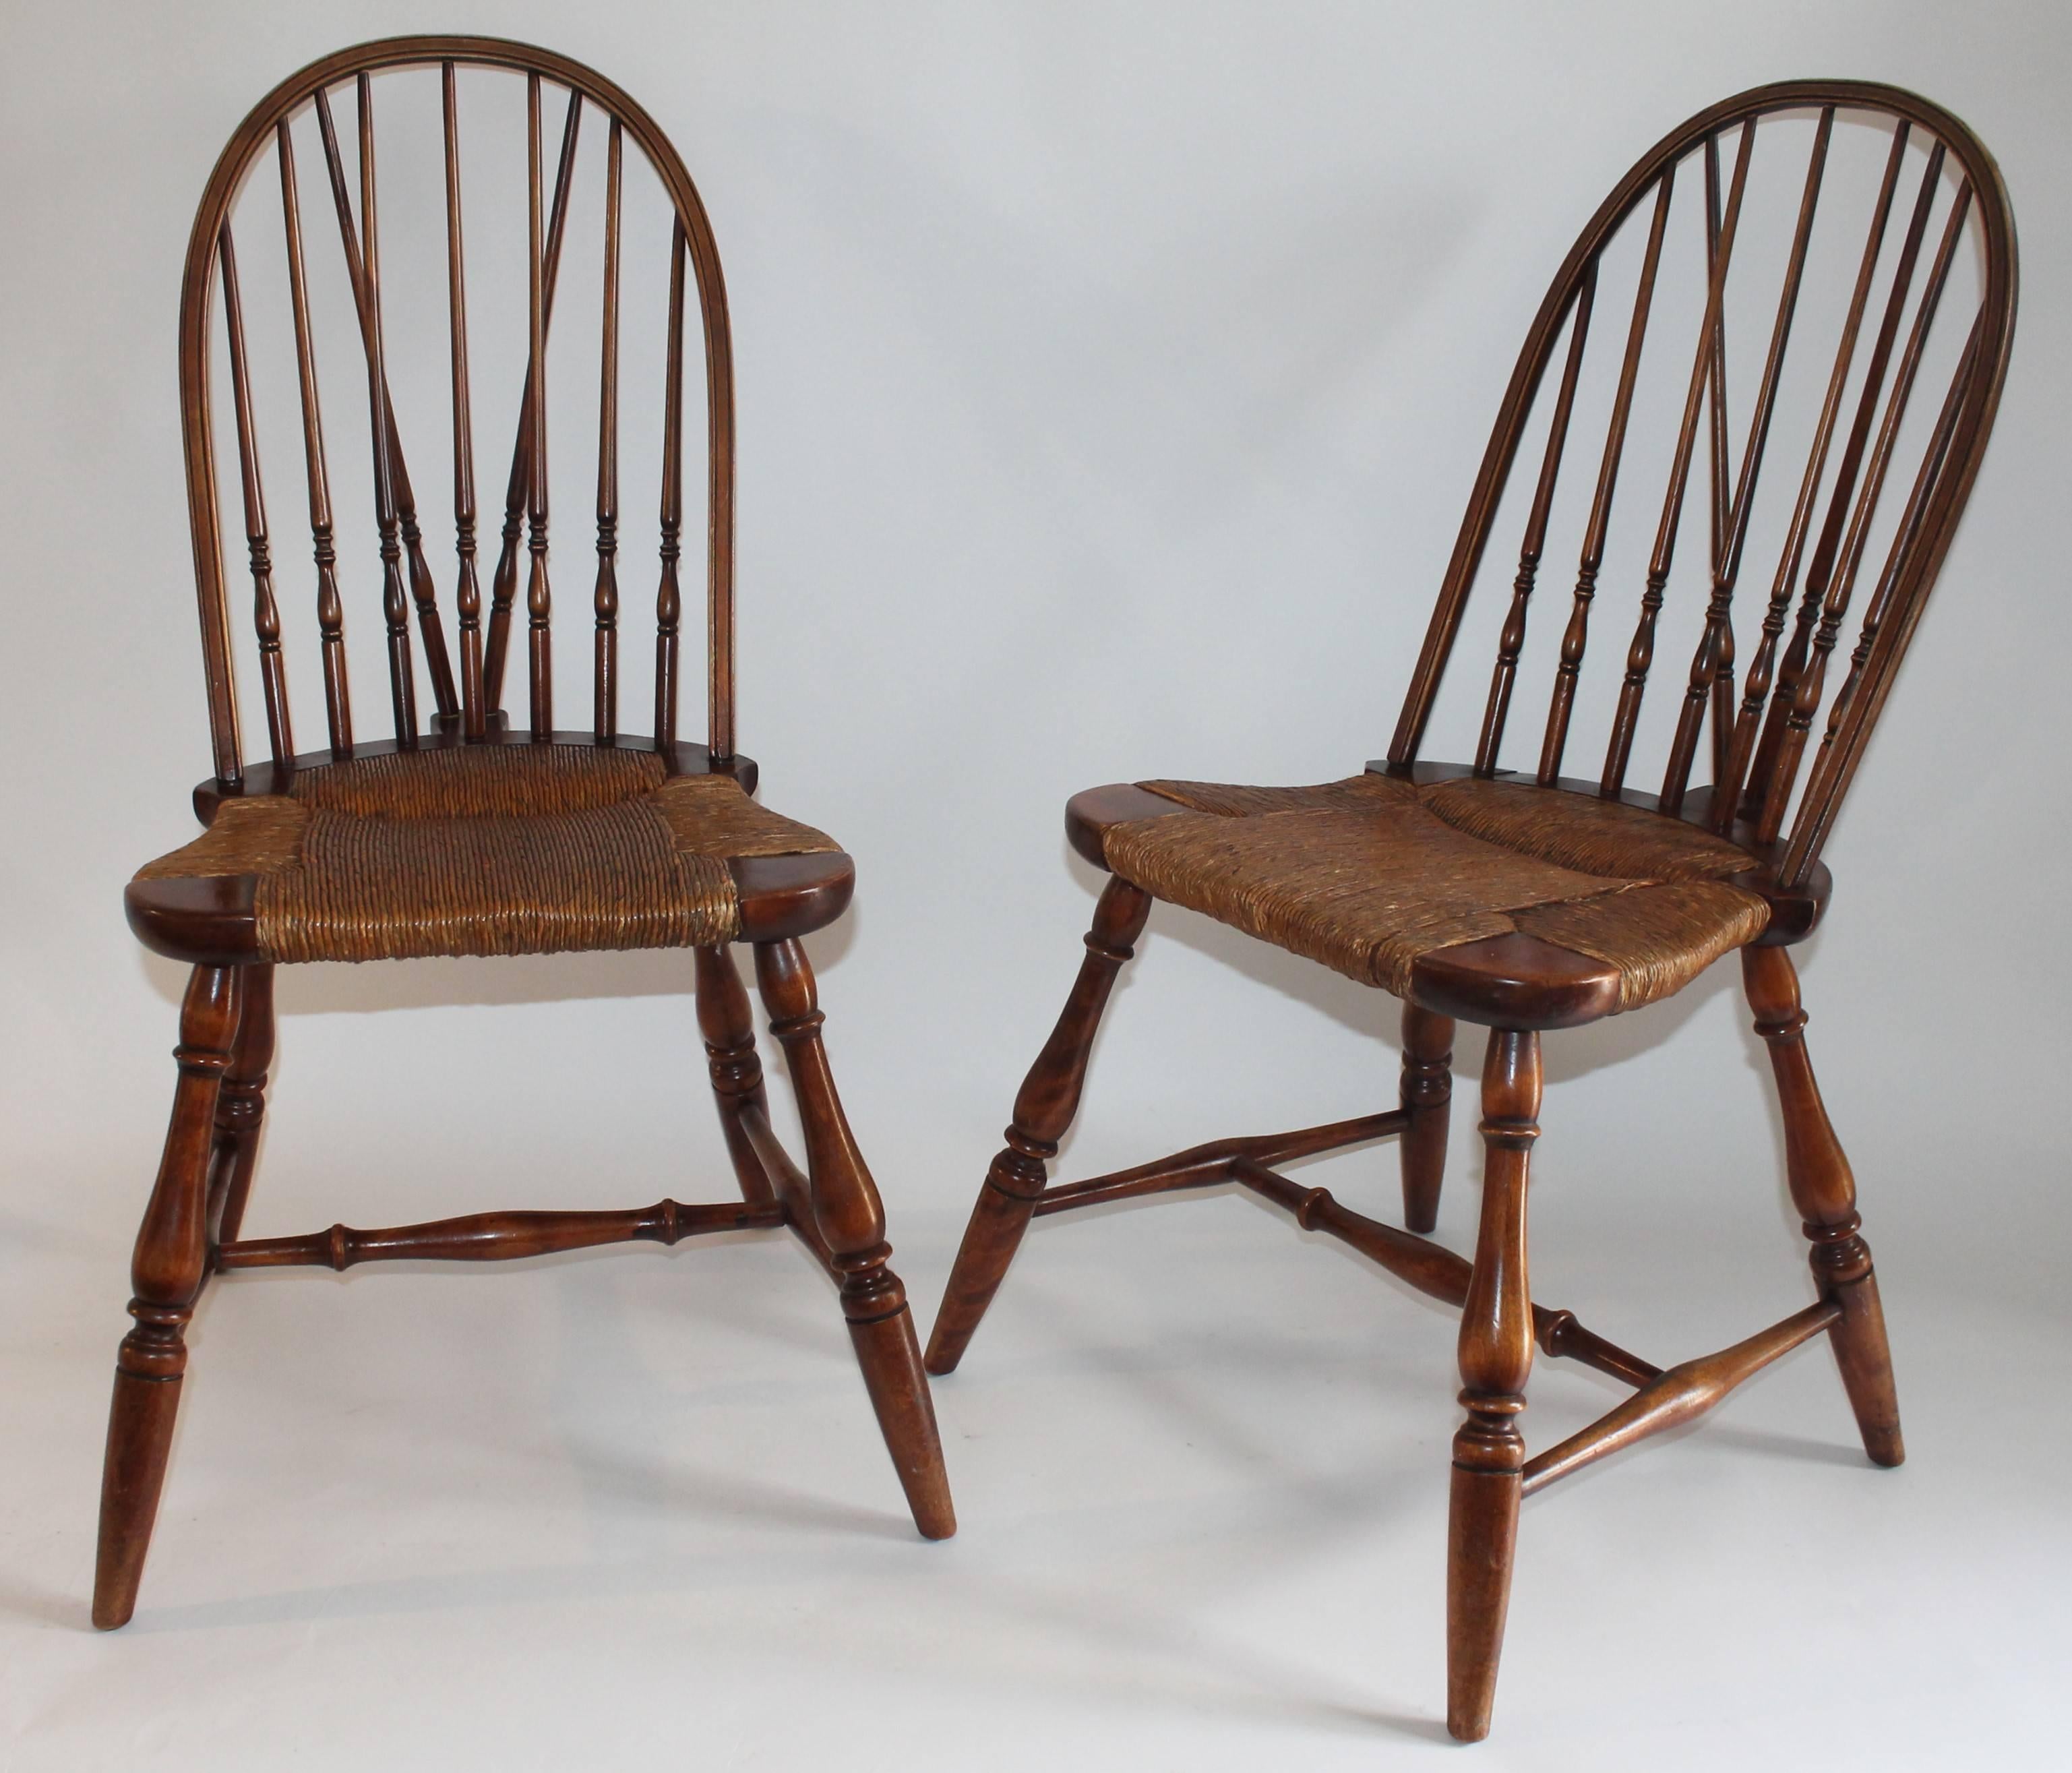 These signed 19th century Davis Furniture Co. chairs are in fine condition with a amazing patina. The seats are all original and hand woven. Sold as a match pair. They are very sturdy and comfortable.